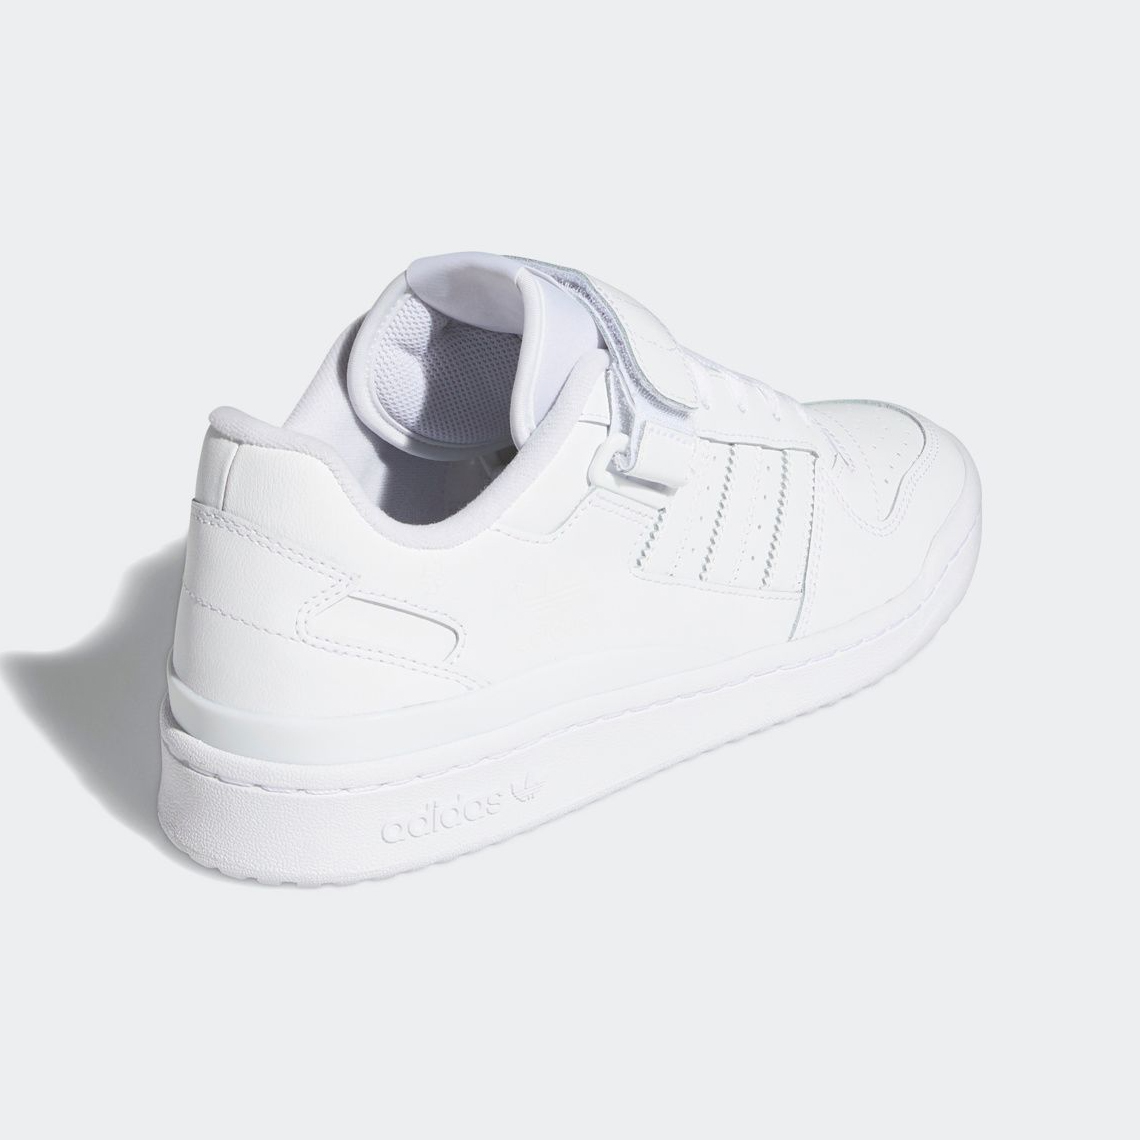 adidas Forum Lo Triple White FY7755 Release Date | SneakerNews.com